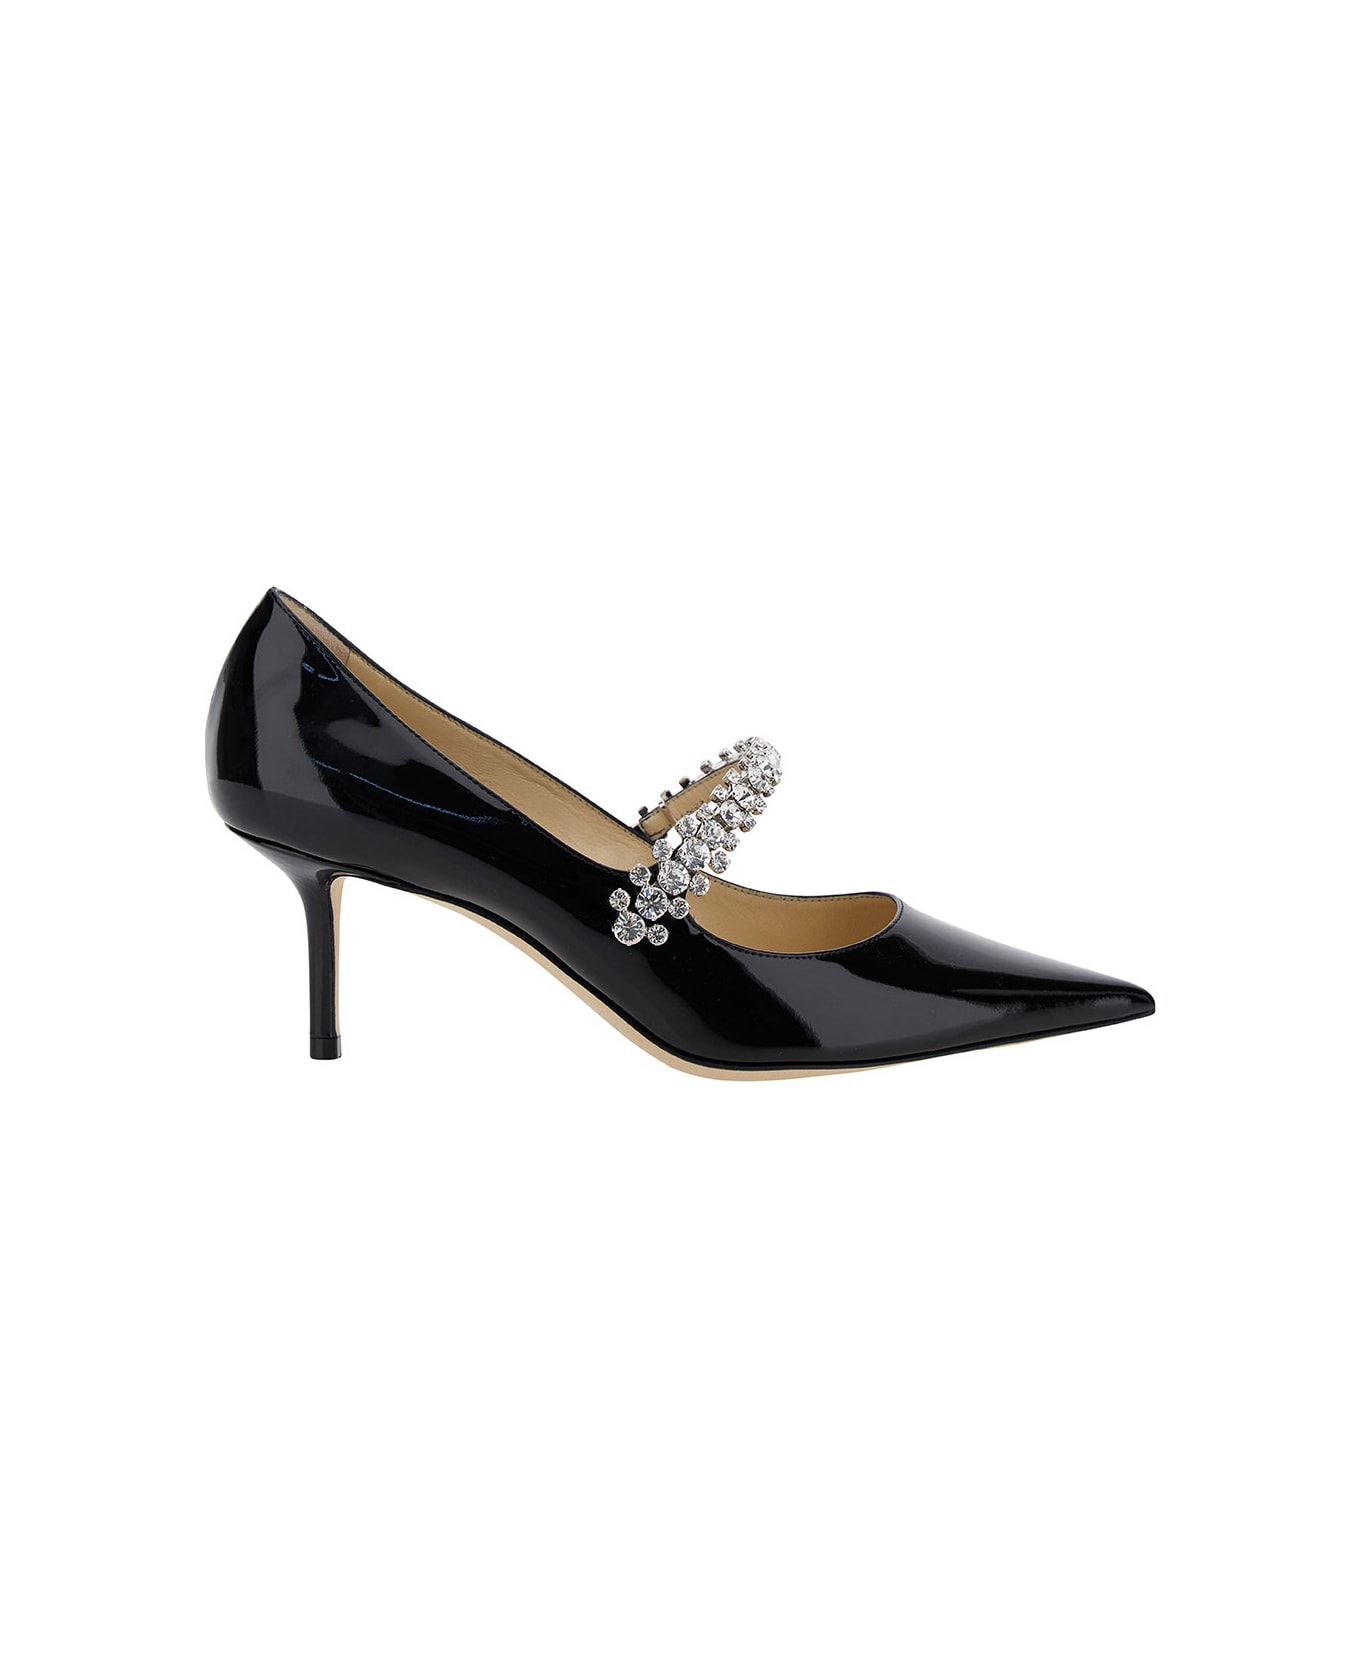 Jimmy Choo 'bing Pump' Black Pumps With Crystal Strap In Patent Leather Woman - Black